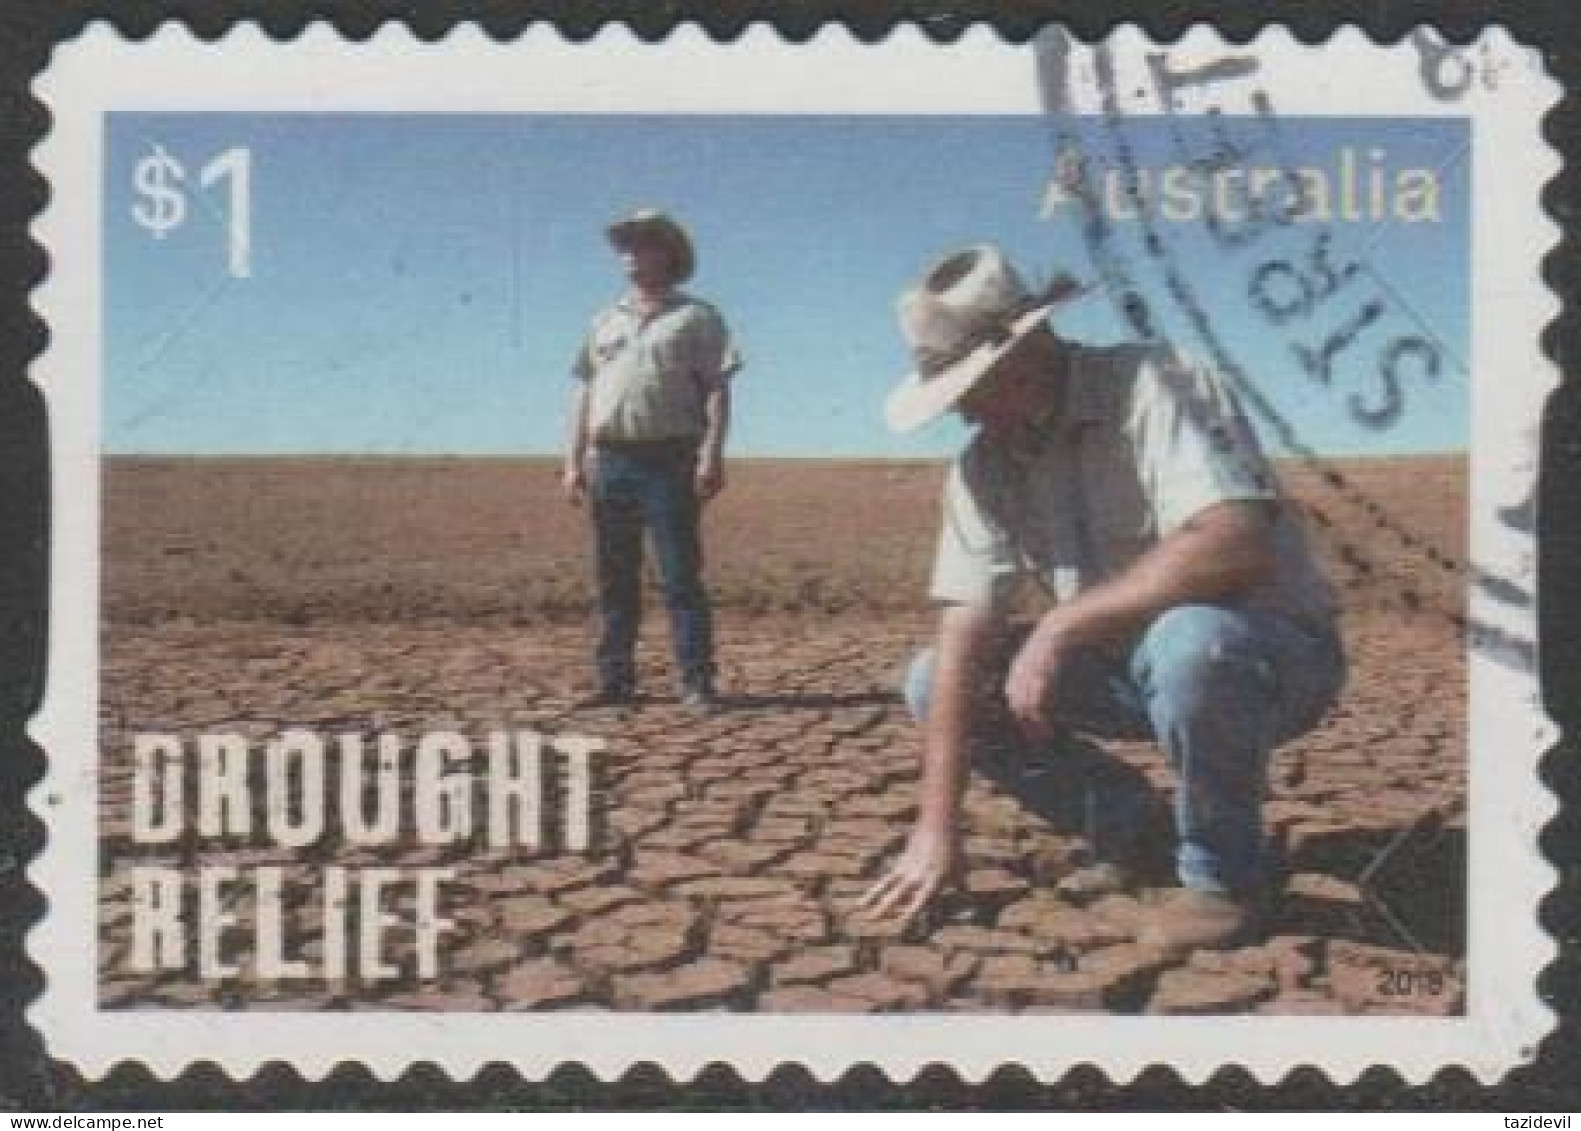 AUSTRALIA - DIE-CUT - USED - 2018 $1.00 Flood Relief - A Donation Was Made For Every Five Stamps Sold - Gebraucht